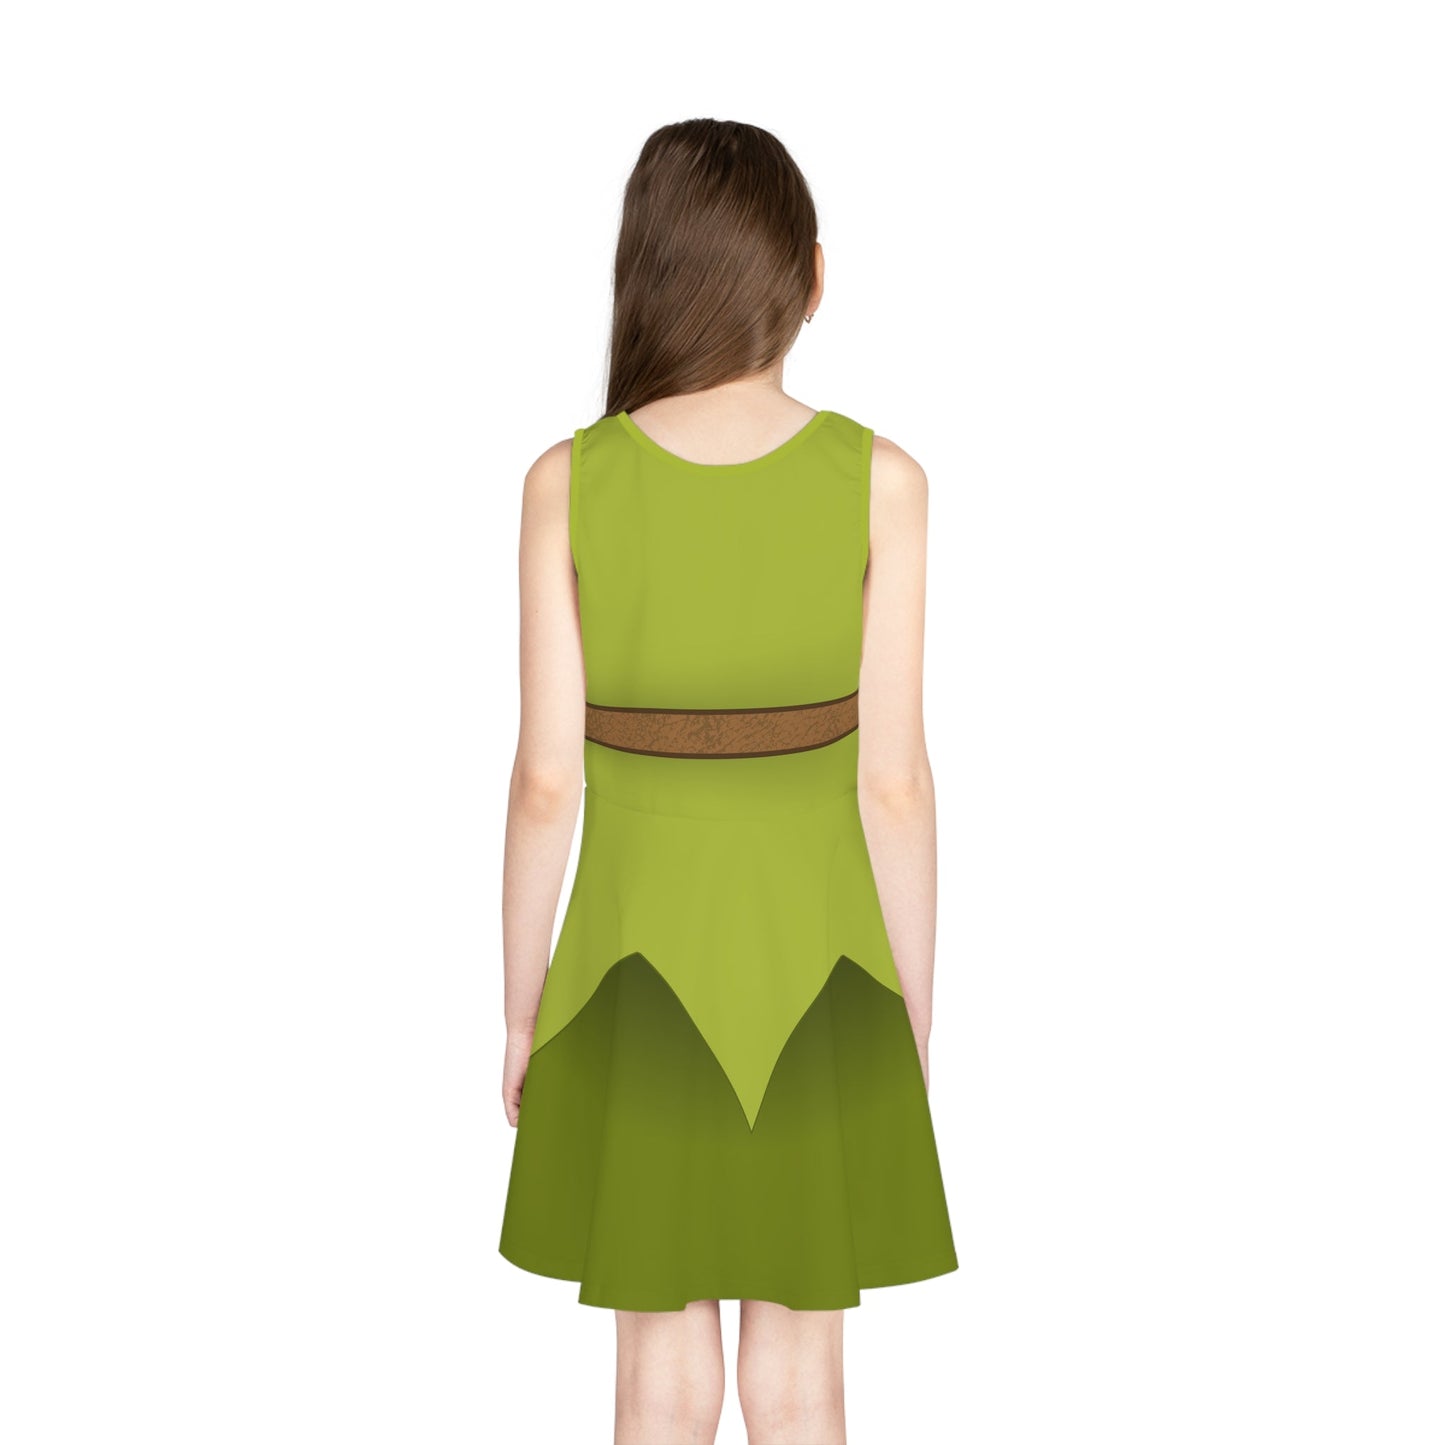 The Pan Girls' Sleeveless Sundress All Over PrintAOPAll Over PrintsWrong Lever Clothing